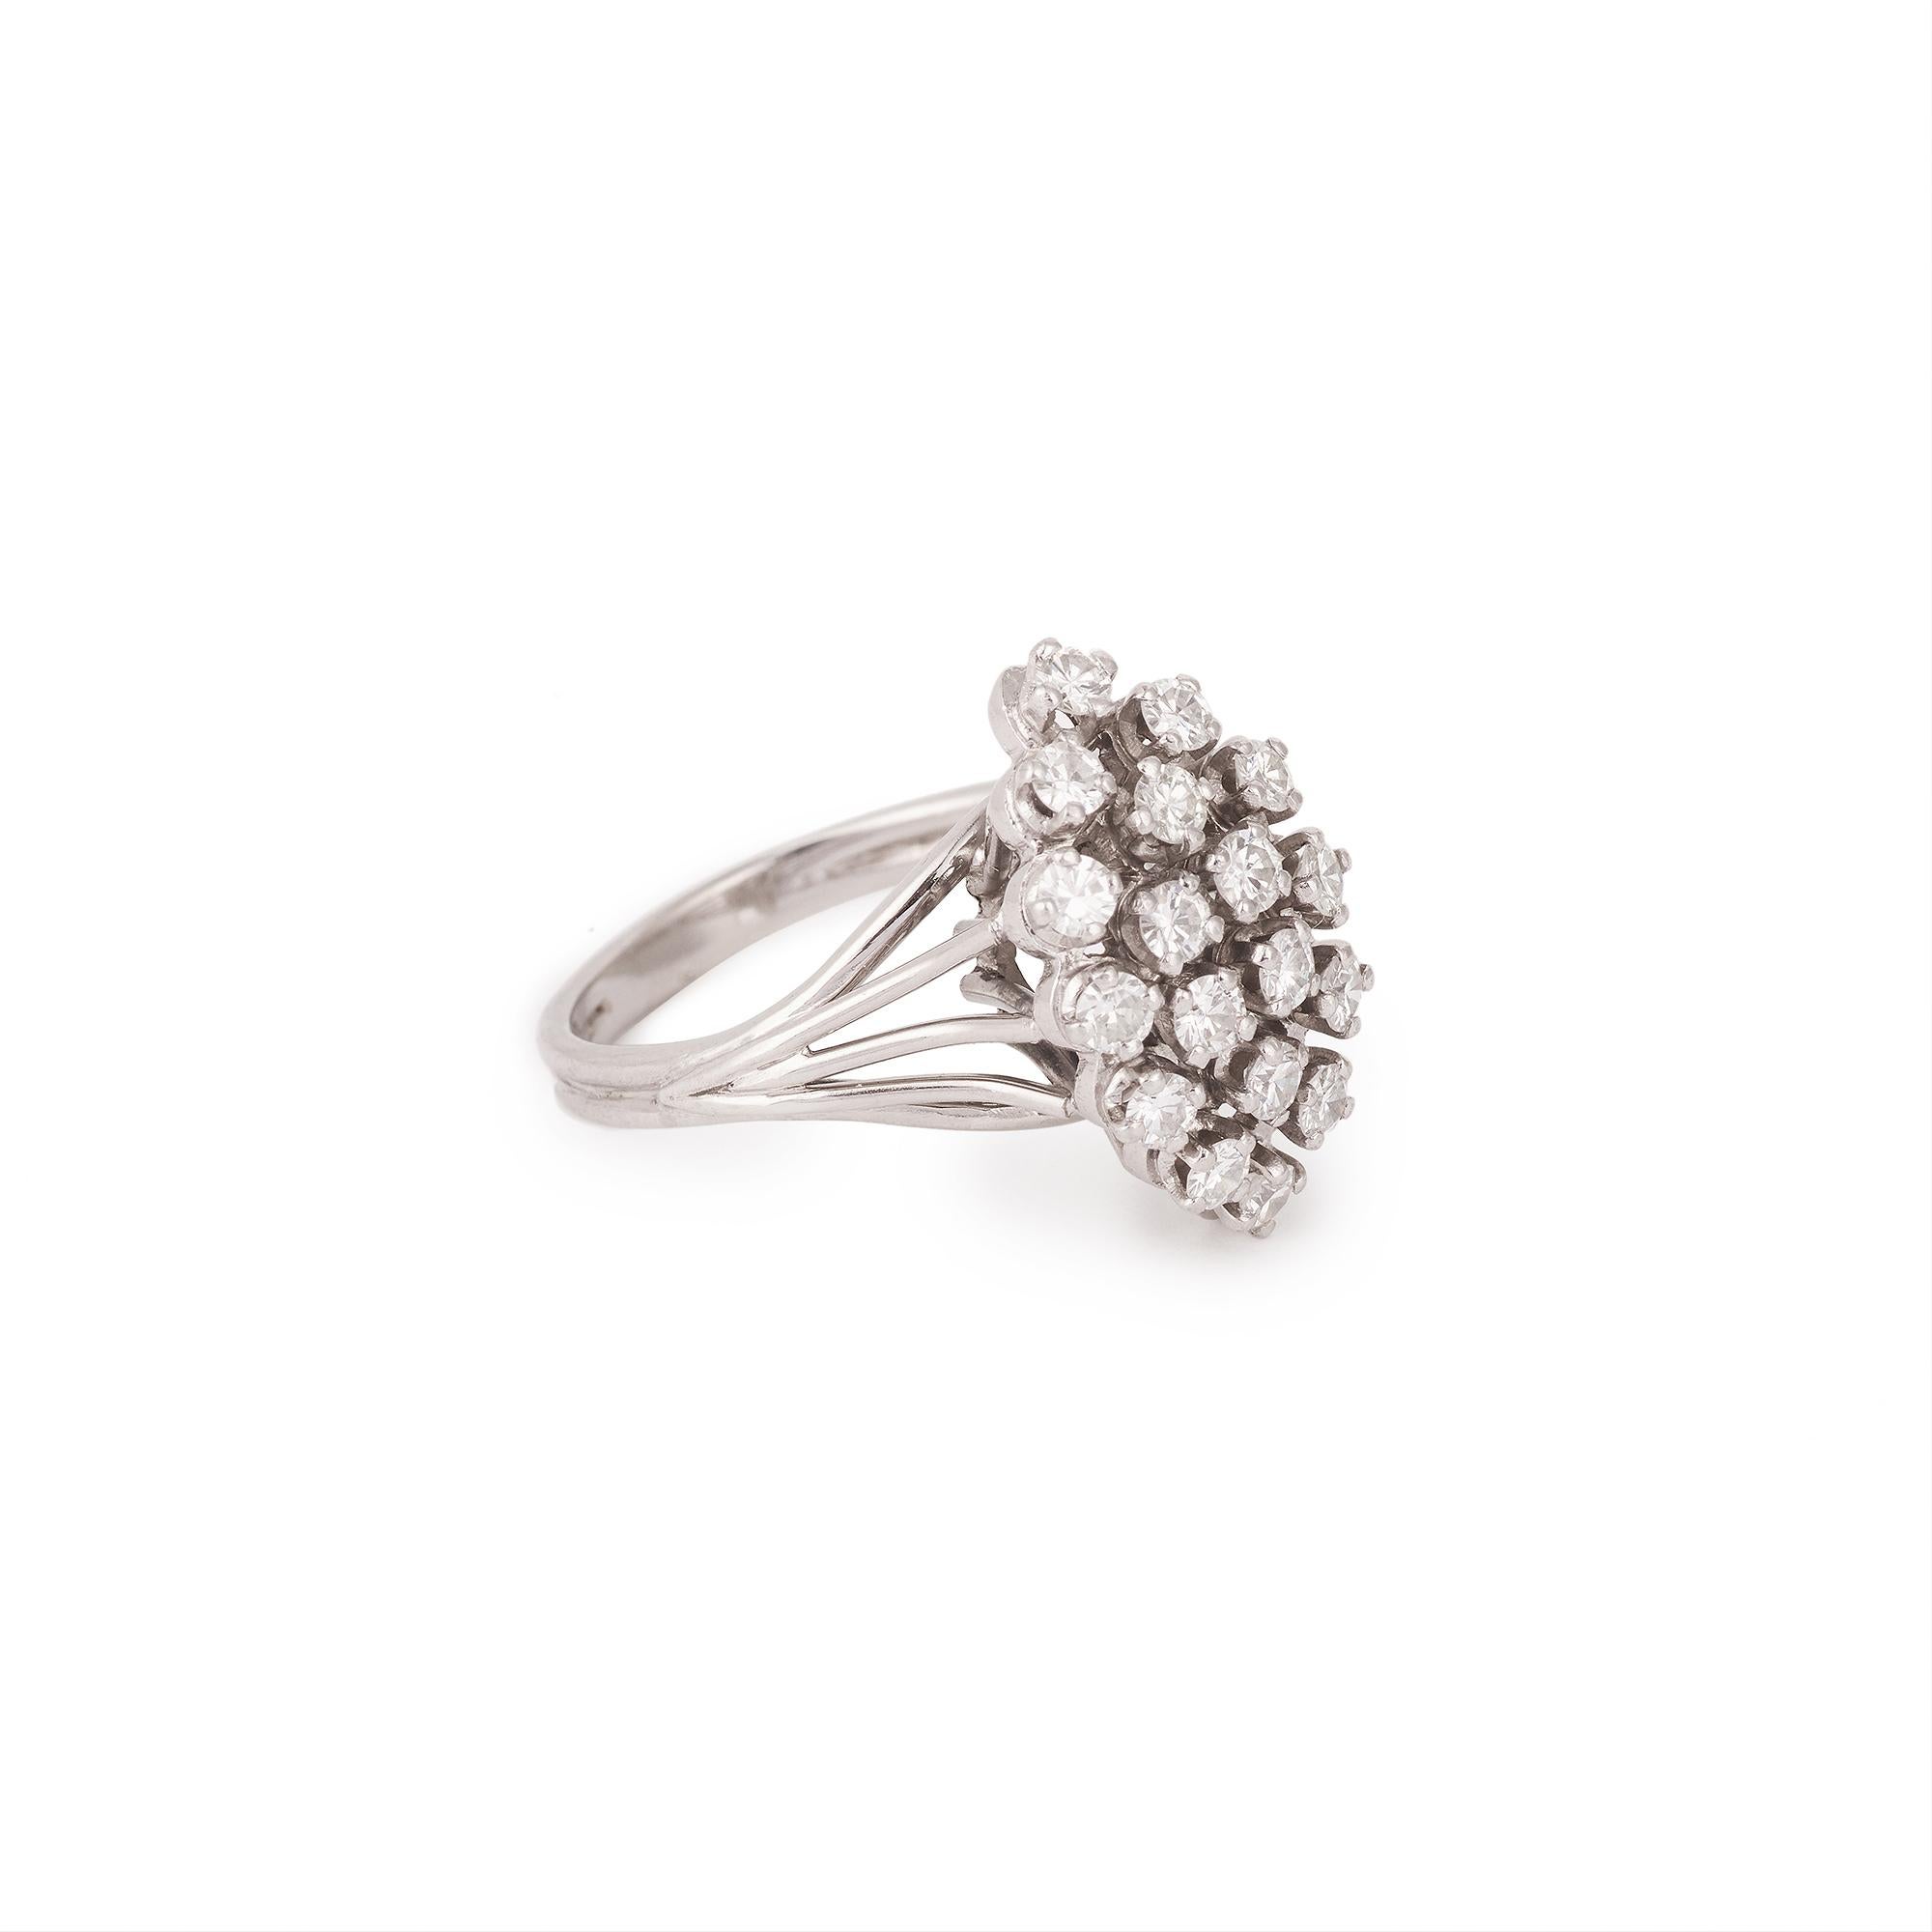 Elegant ring in white gold and platinum set with a large pavement of diamonds forming a marquise

Total approx weight of diamonds : 1.10 carats

Finger size : 58 (US size : 8 1/2)

Dimensions: 20.53 x 12.39 x 9.60 mm (0.806 x 0.488 x 0.378